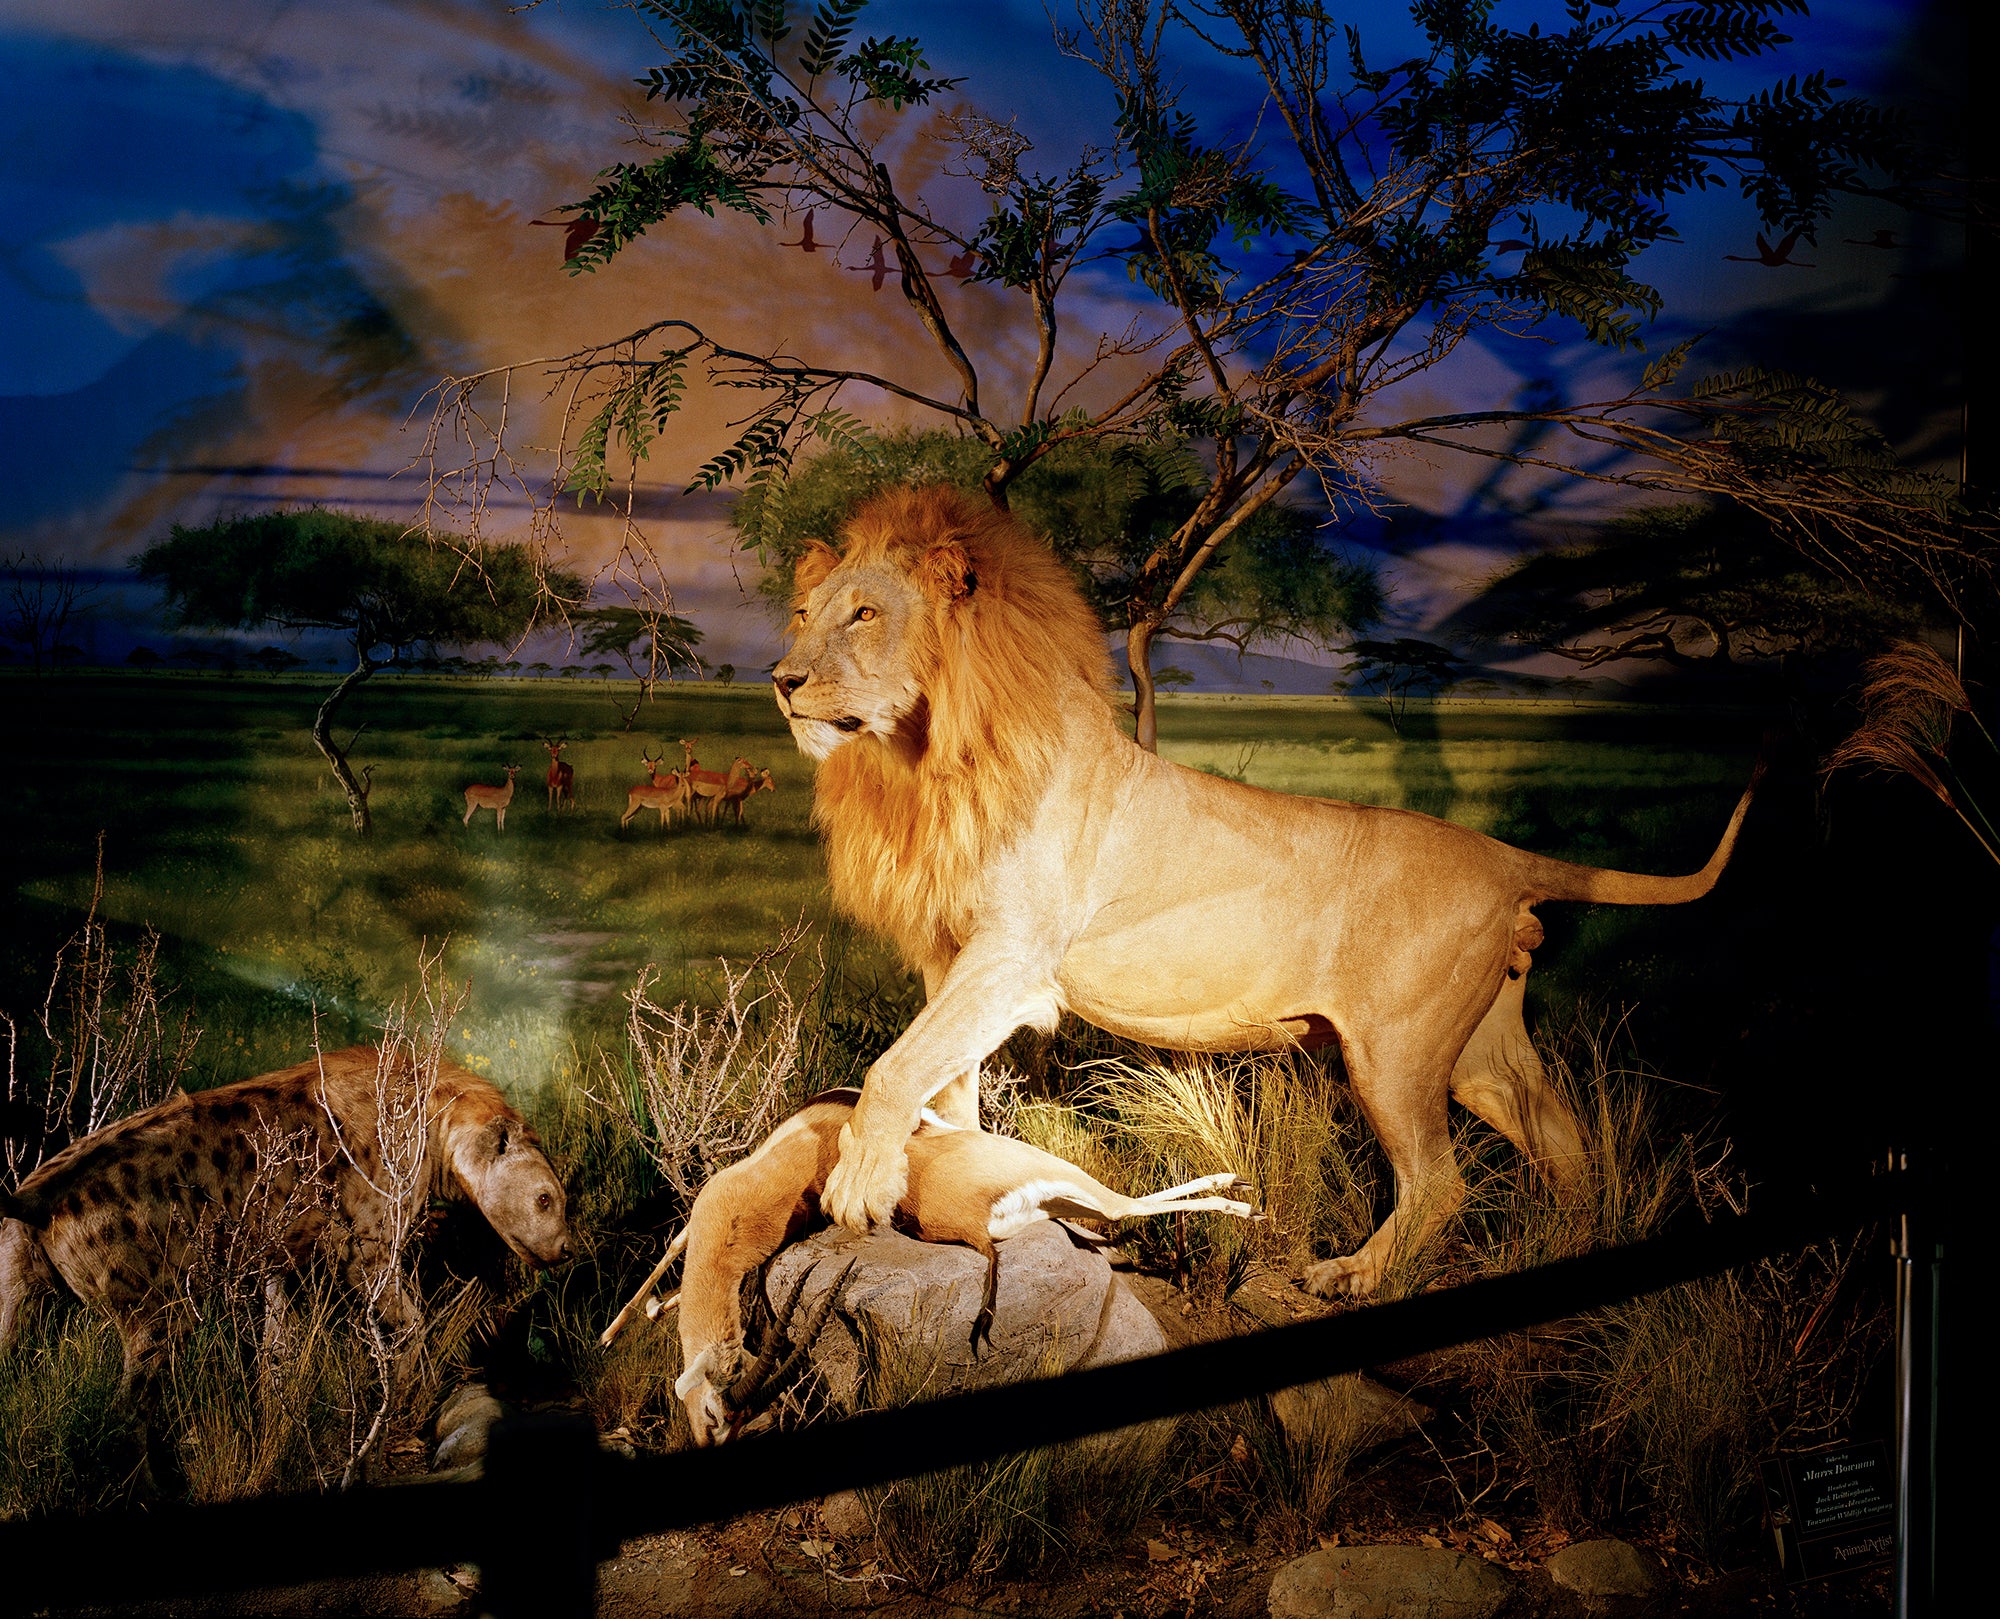 'Lion' by British photographer David Chancellor is shortlisted in the Professional Campaign category